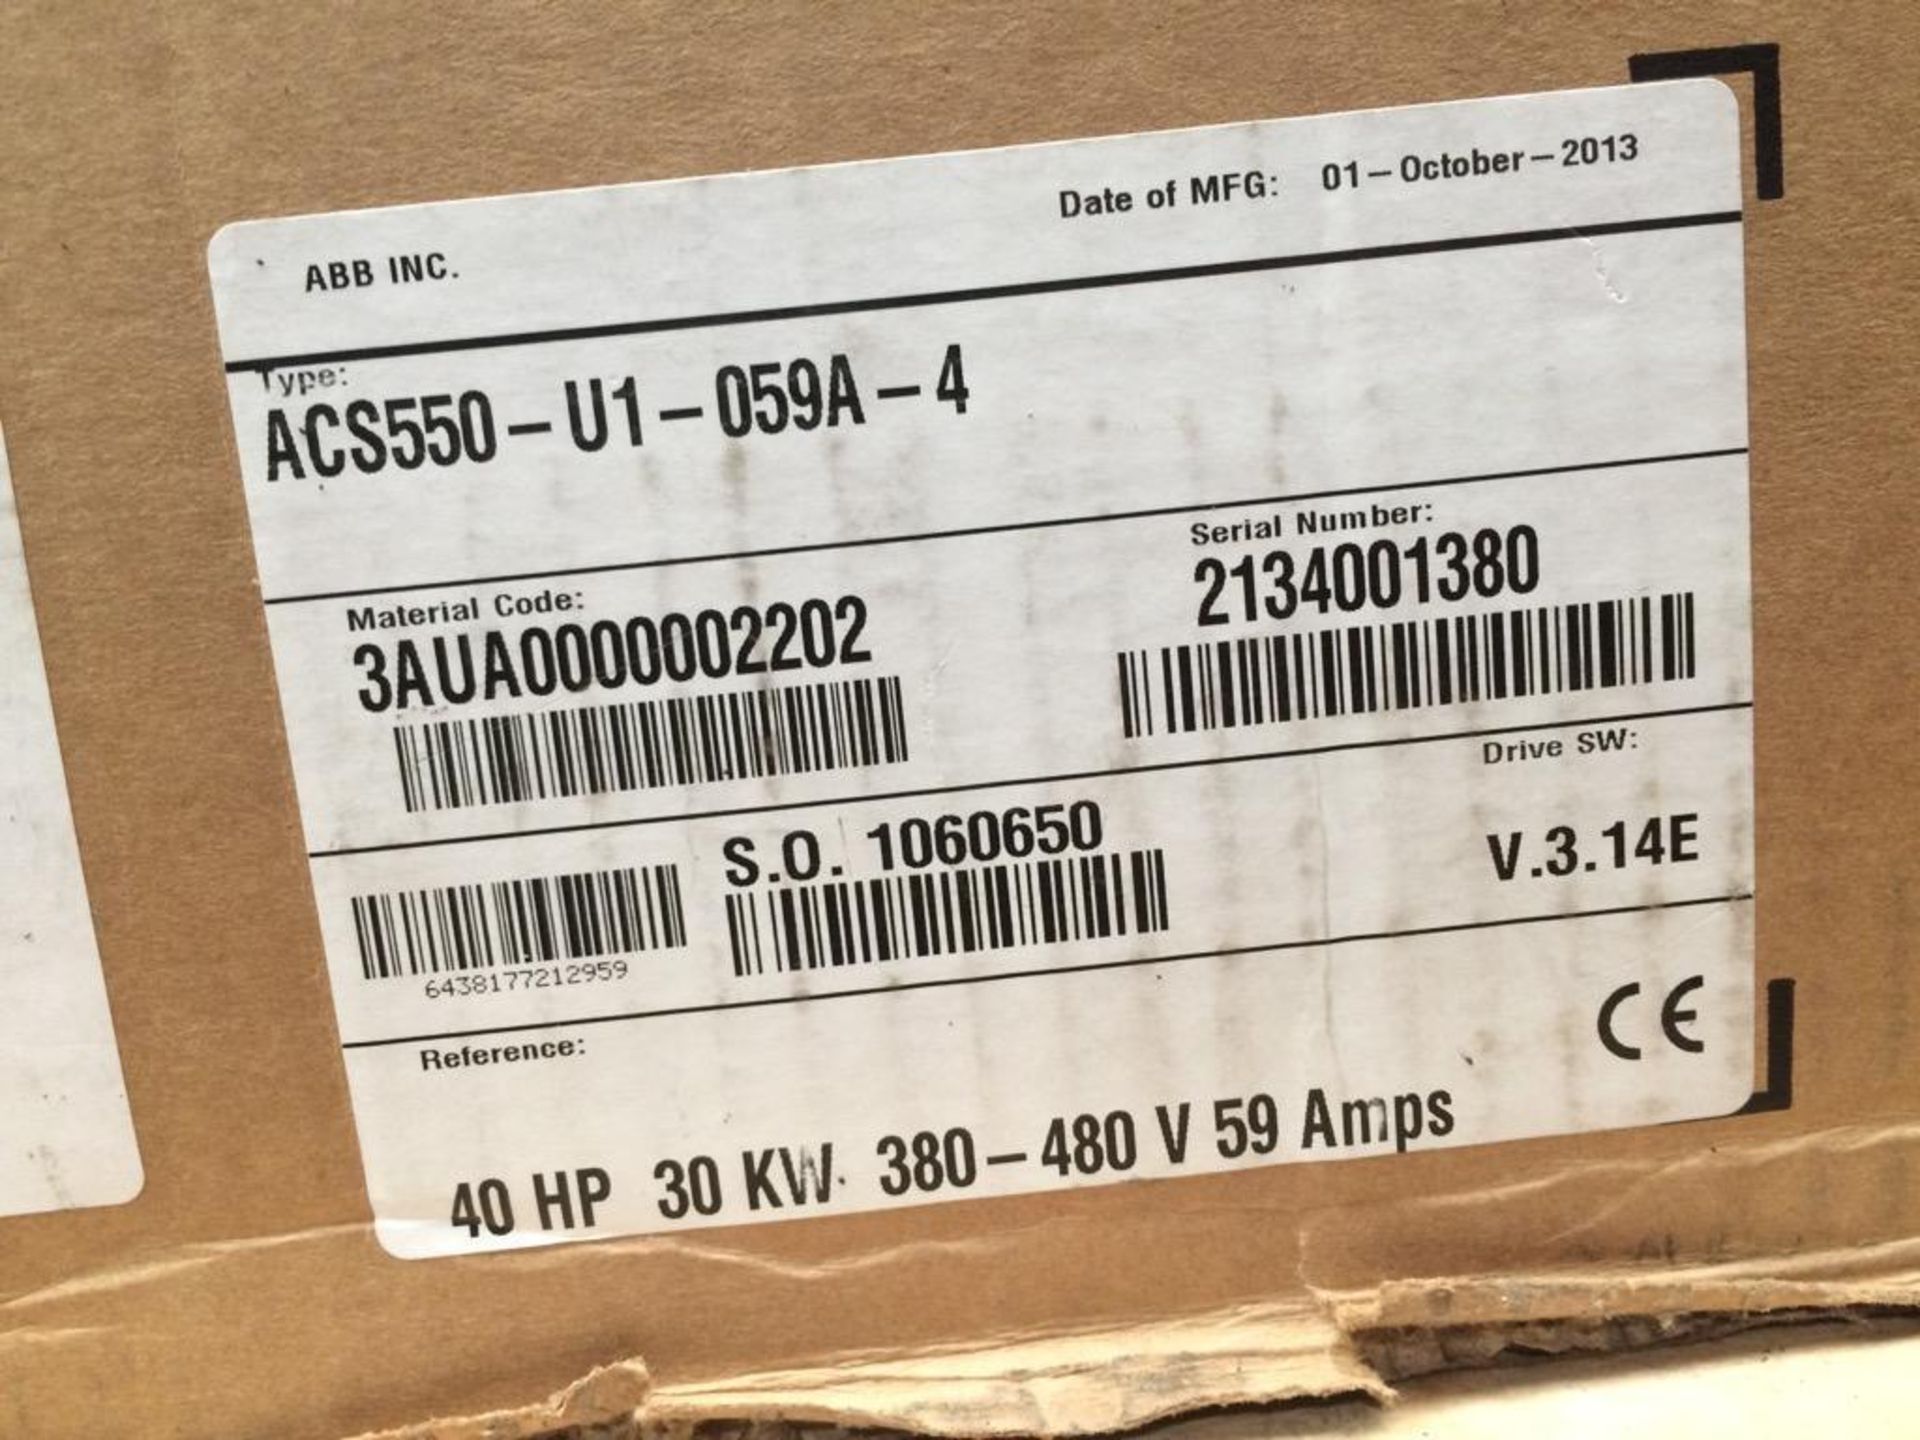 New In Box ABB Model ACS550-01-059A-4 40HP 30KW VFD Variable Frequency Drive. Serial Number 21340013